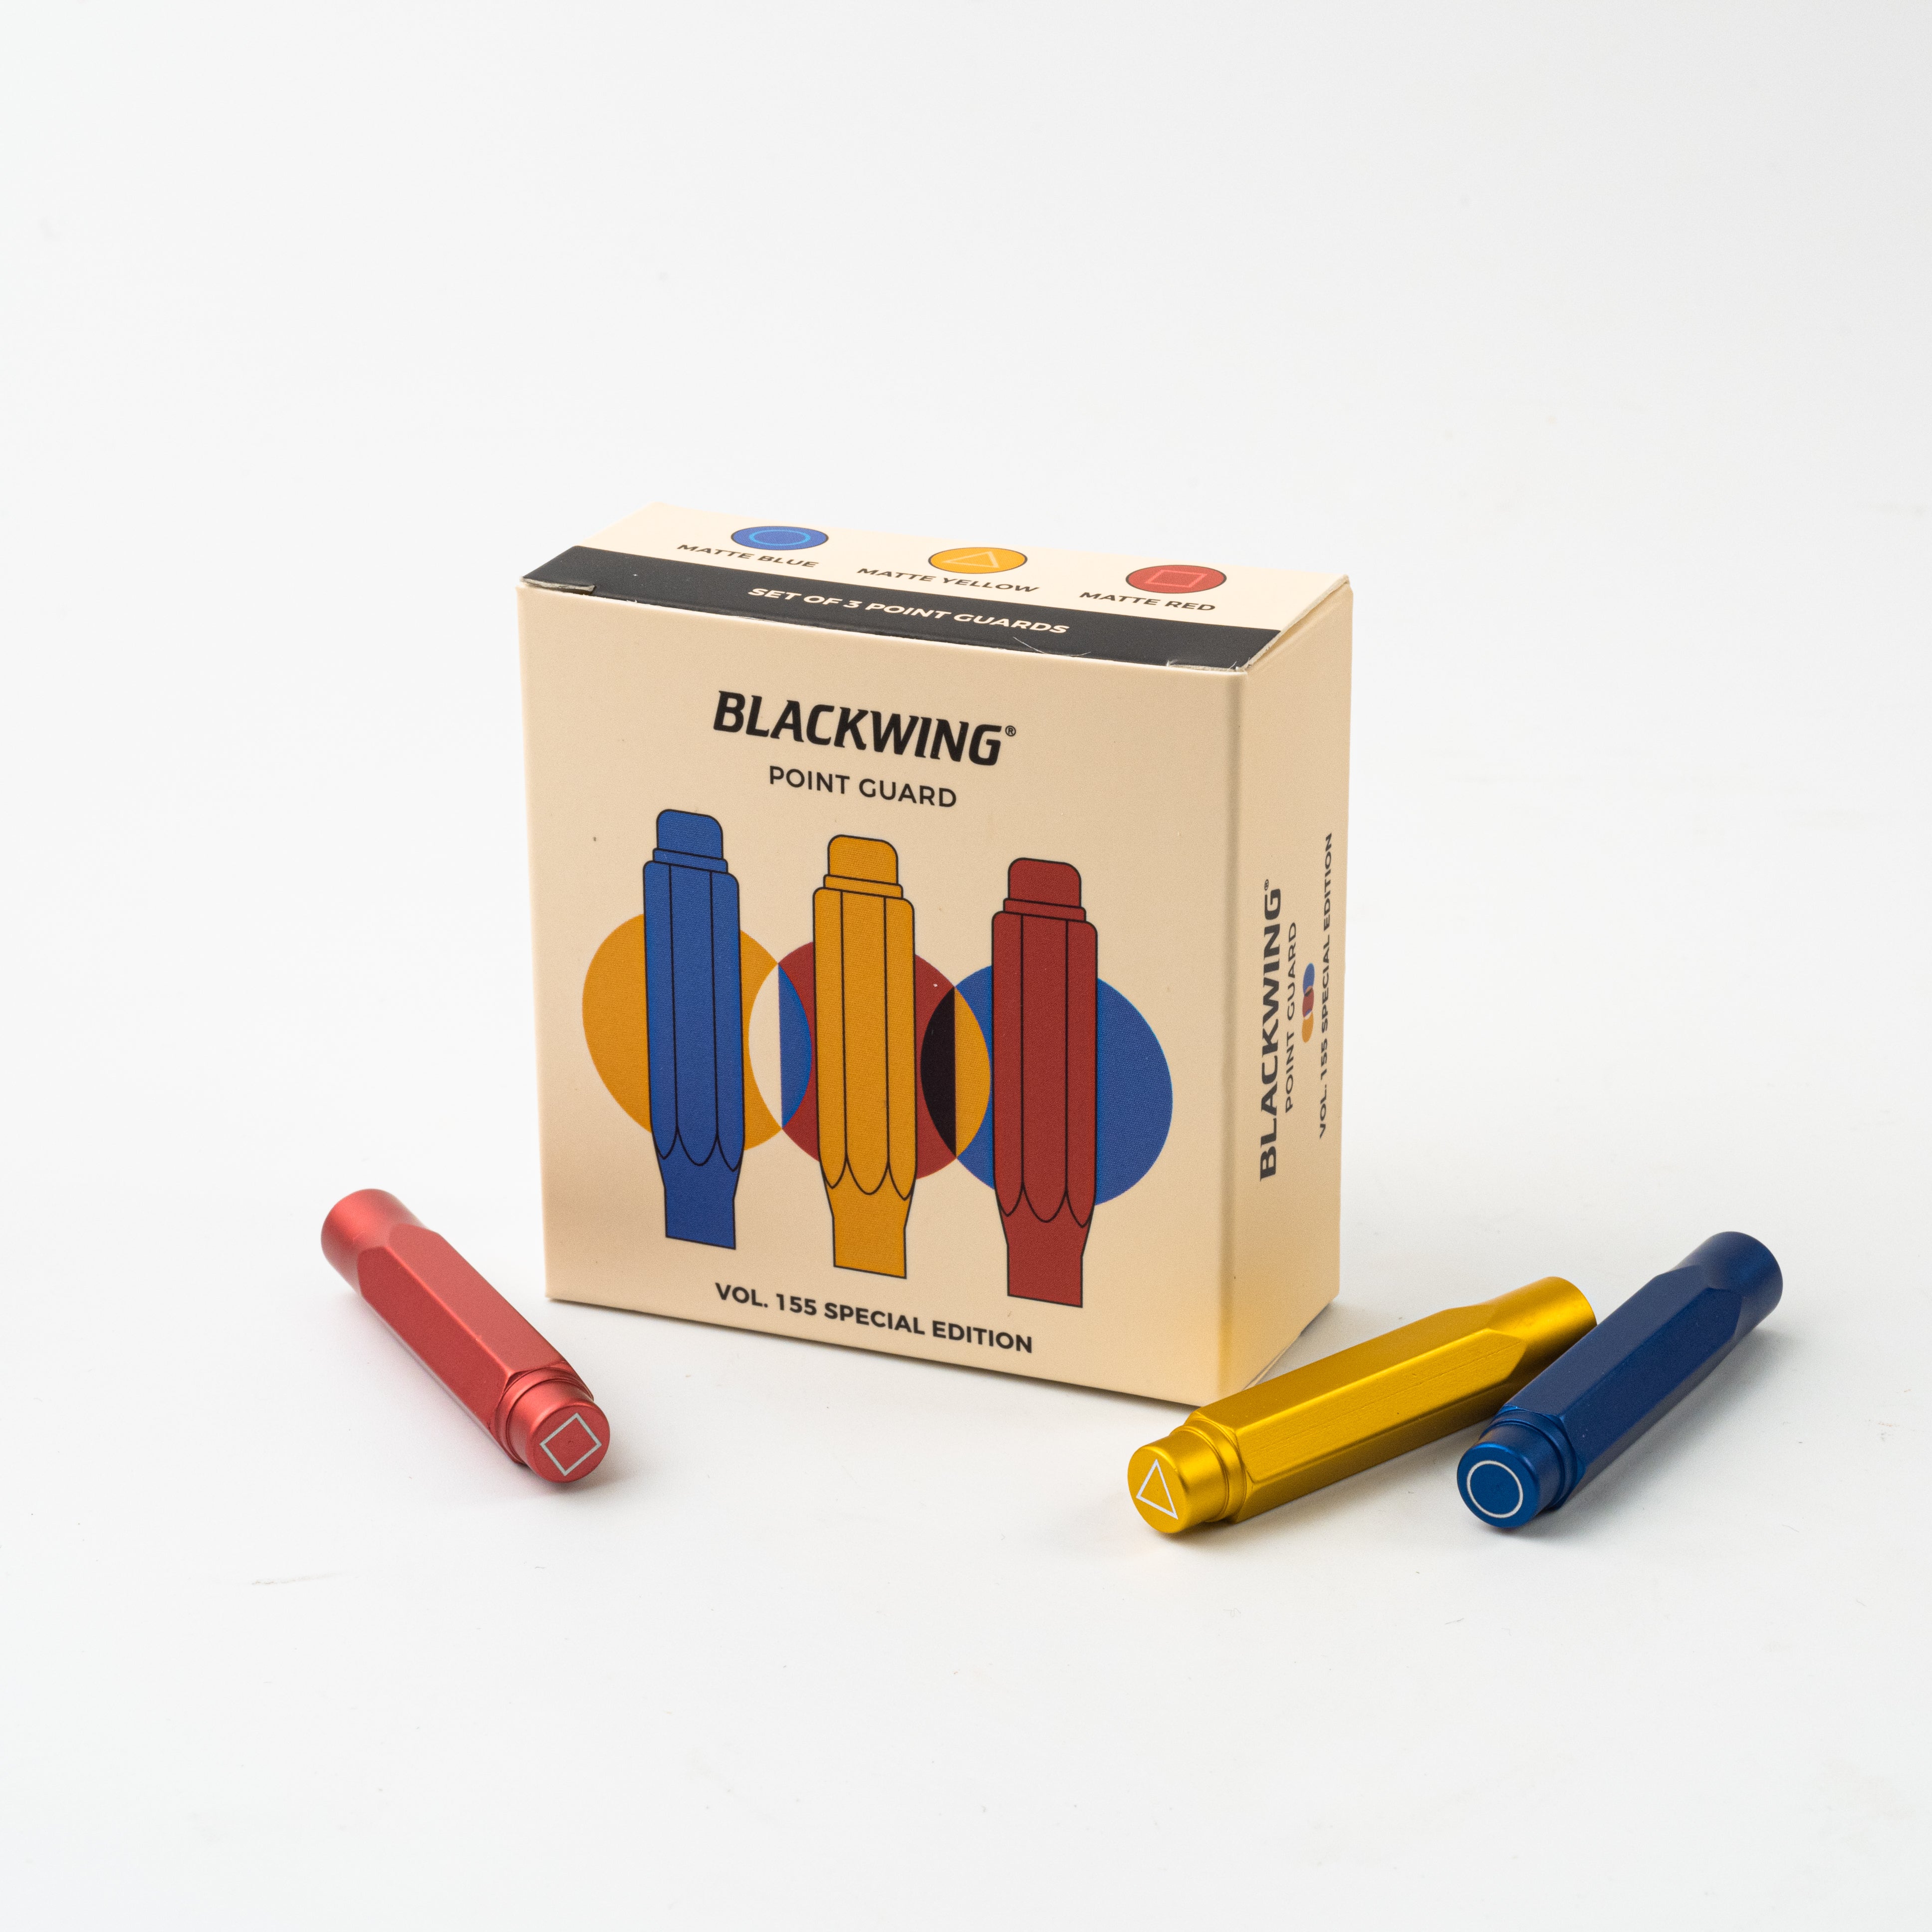 A set of colored pencils and a box of Blackwing 155 Point Guards (Set of 3) pencils.